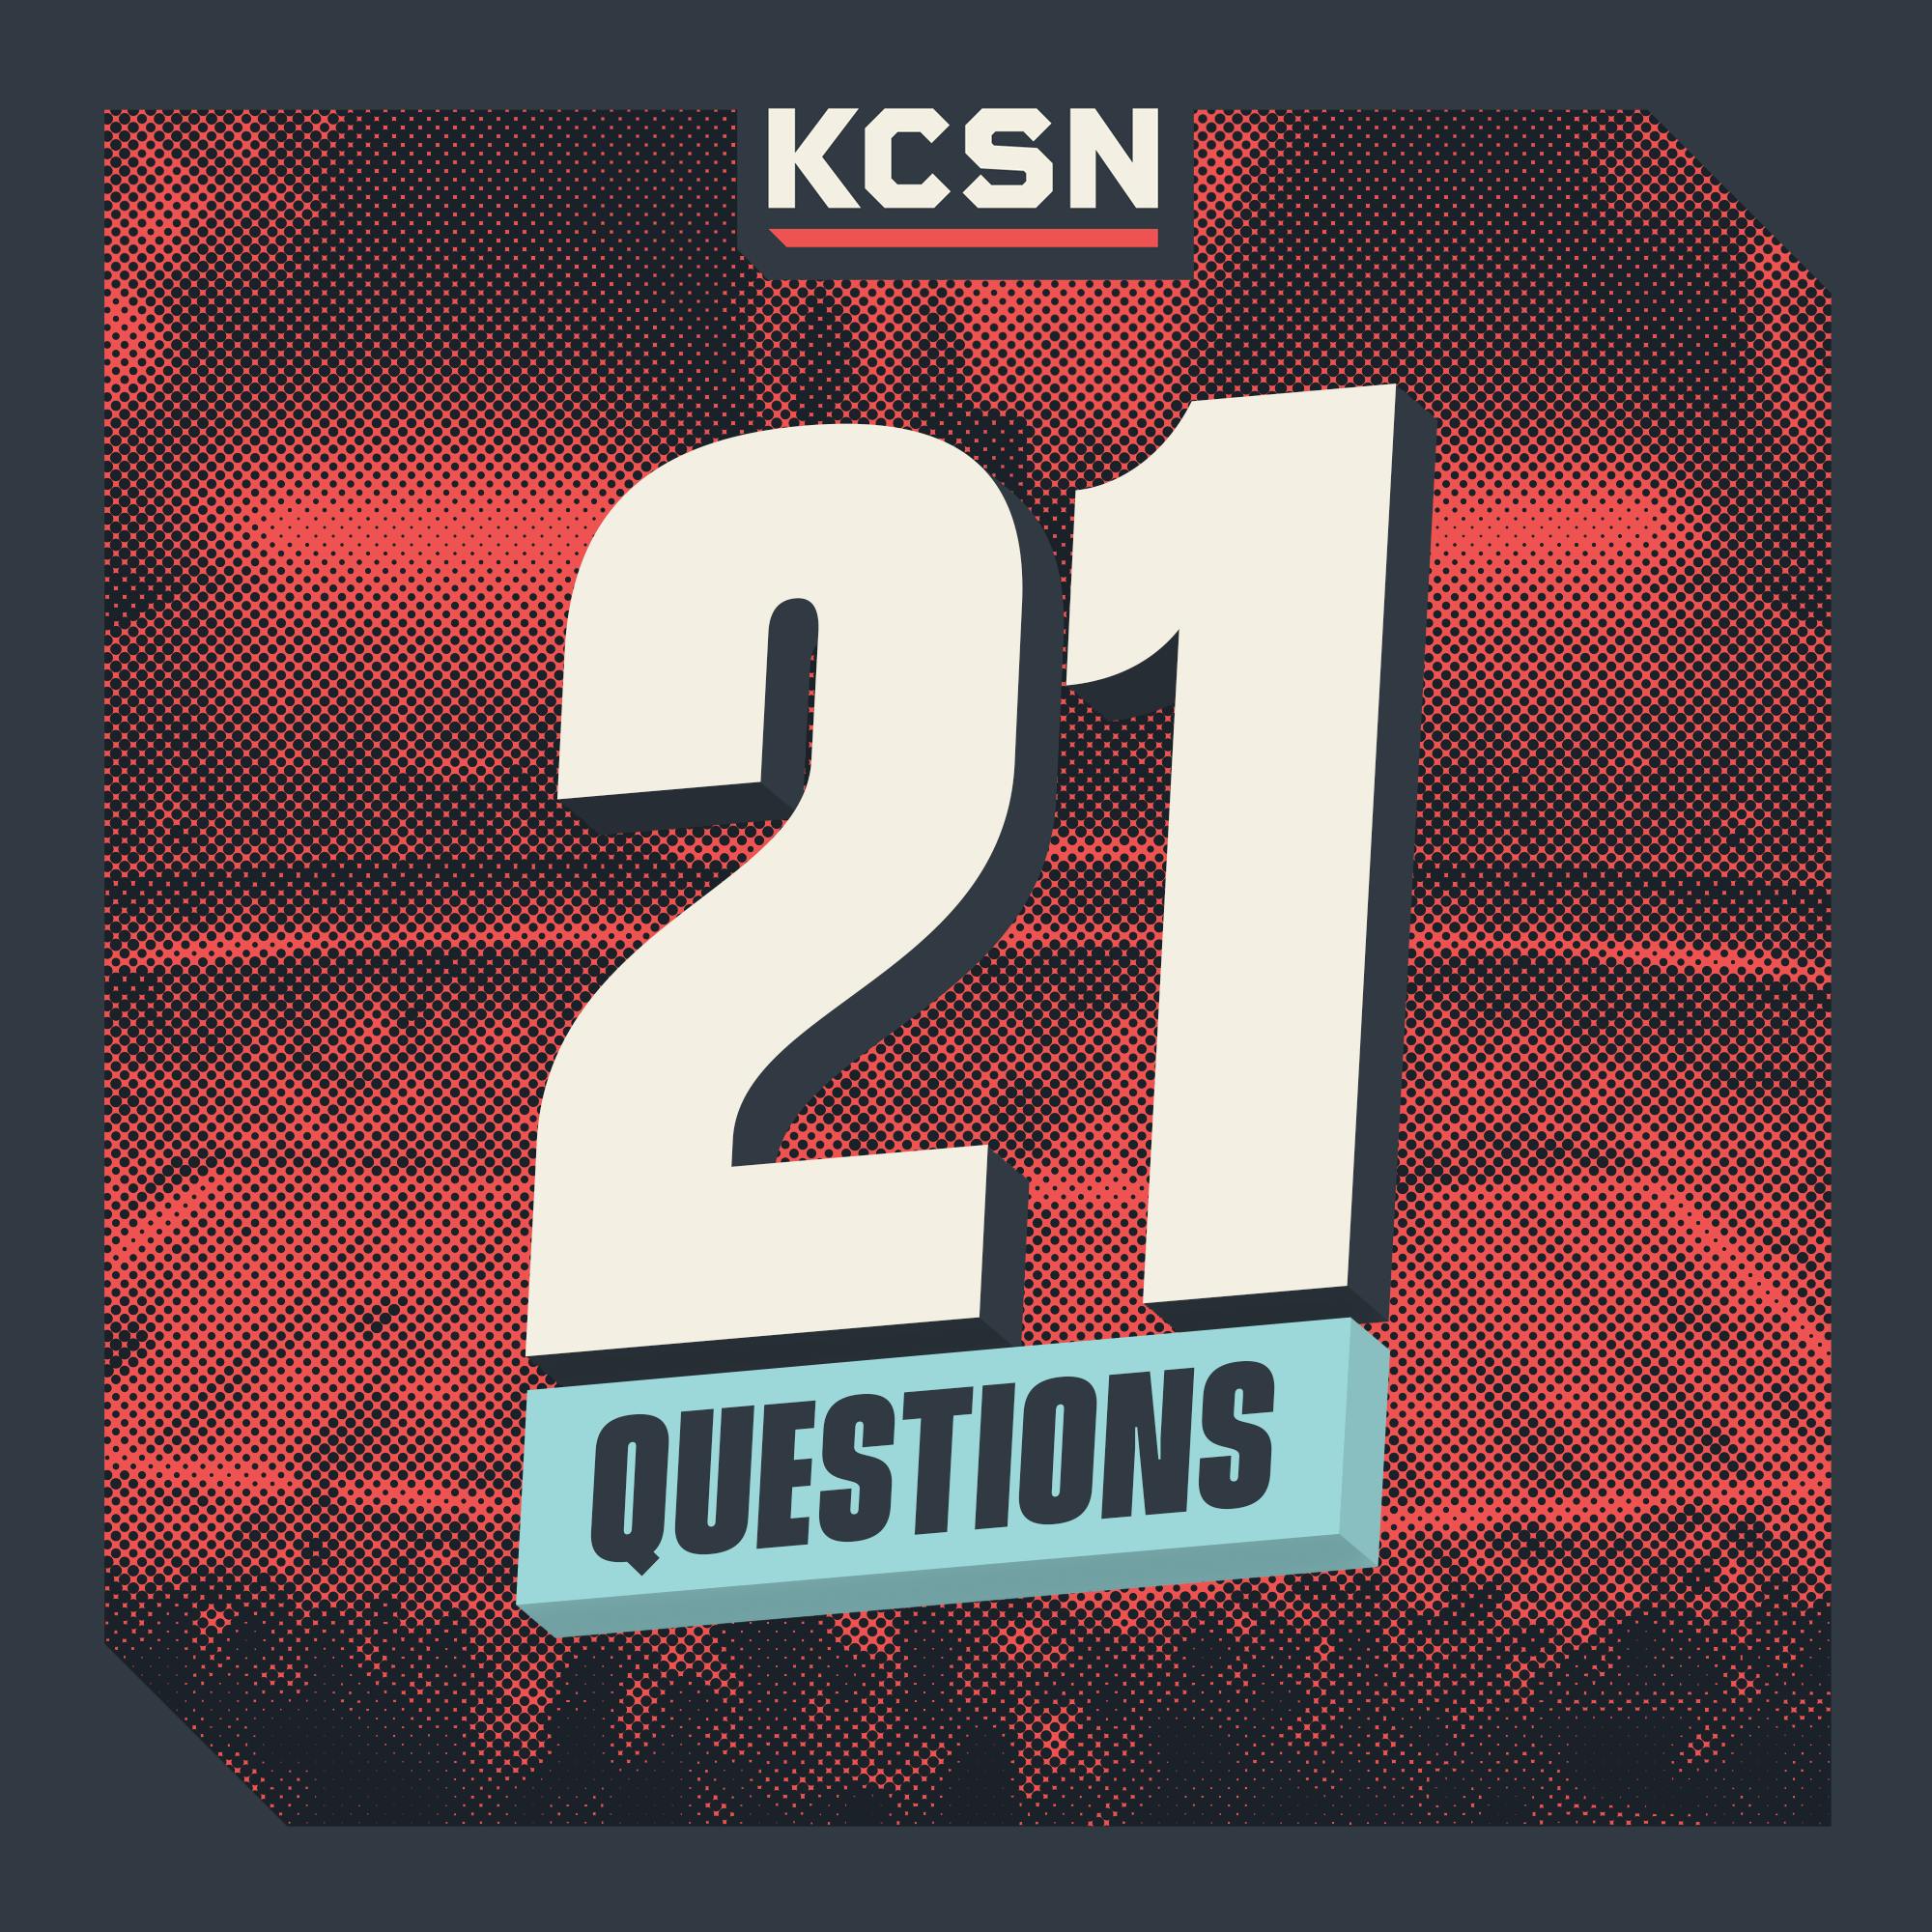 21 Questions 2/28: Thoughts on Chiefs' Poor Grades on NFLPA Report Card, Trade Scenarios & More